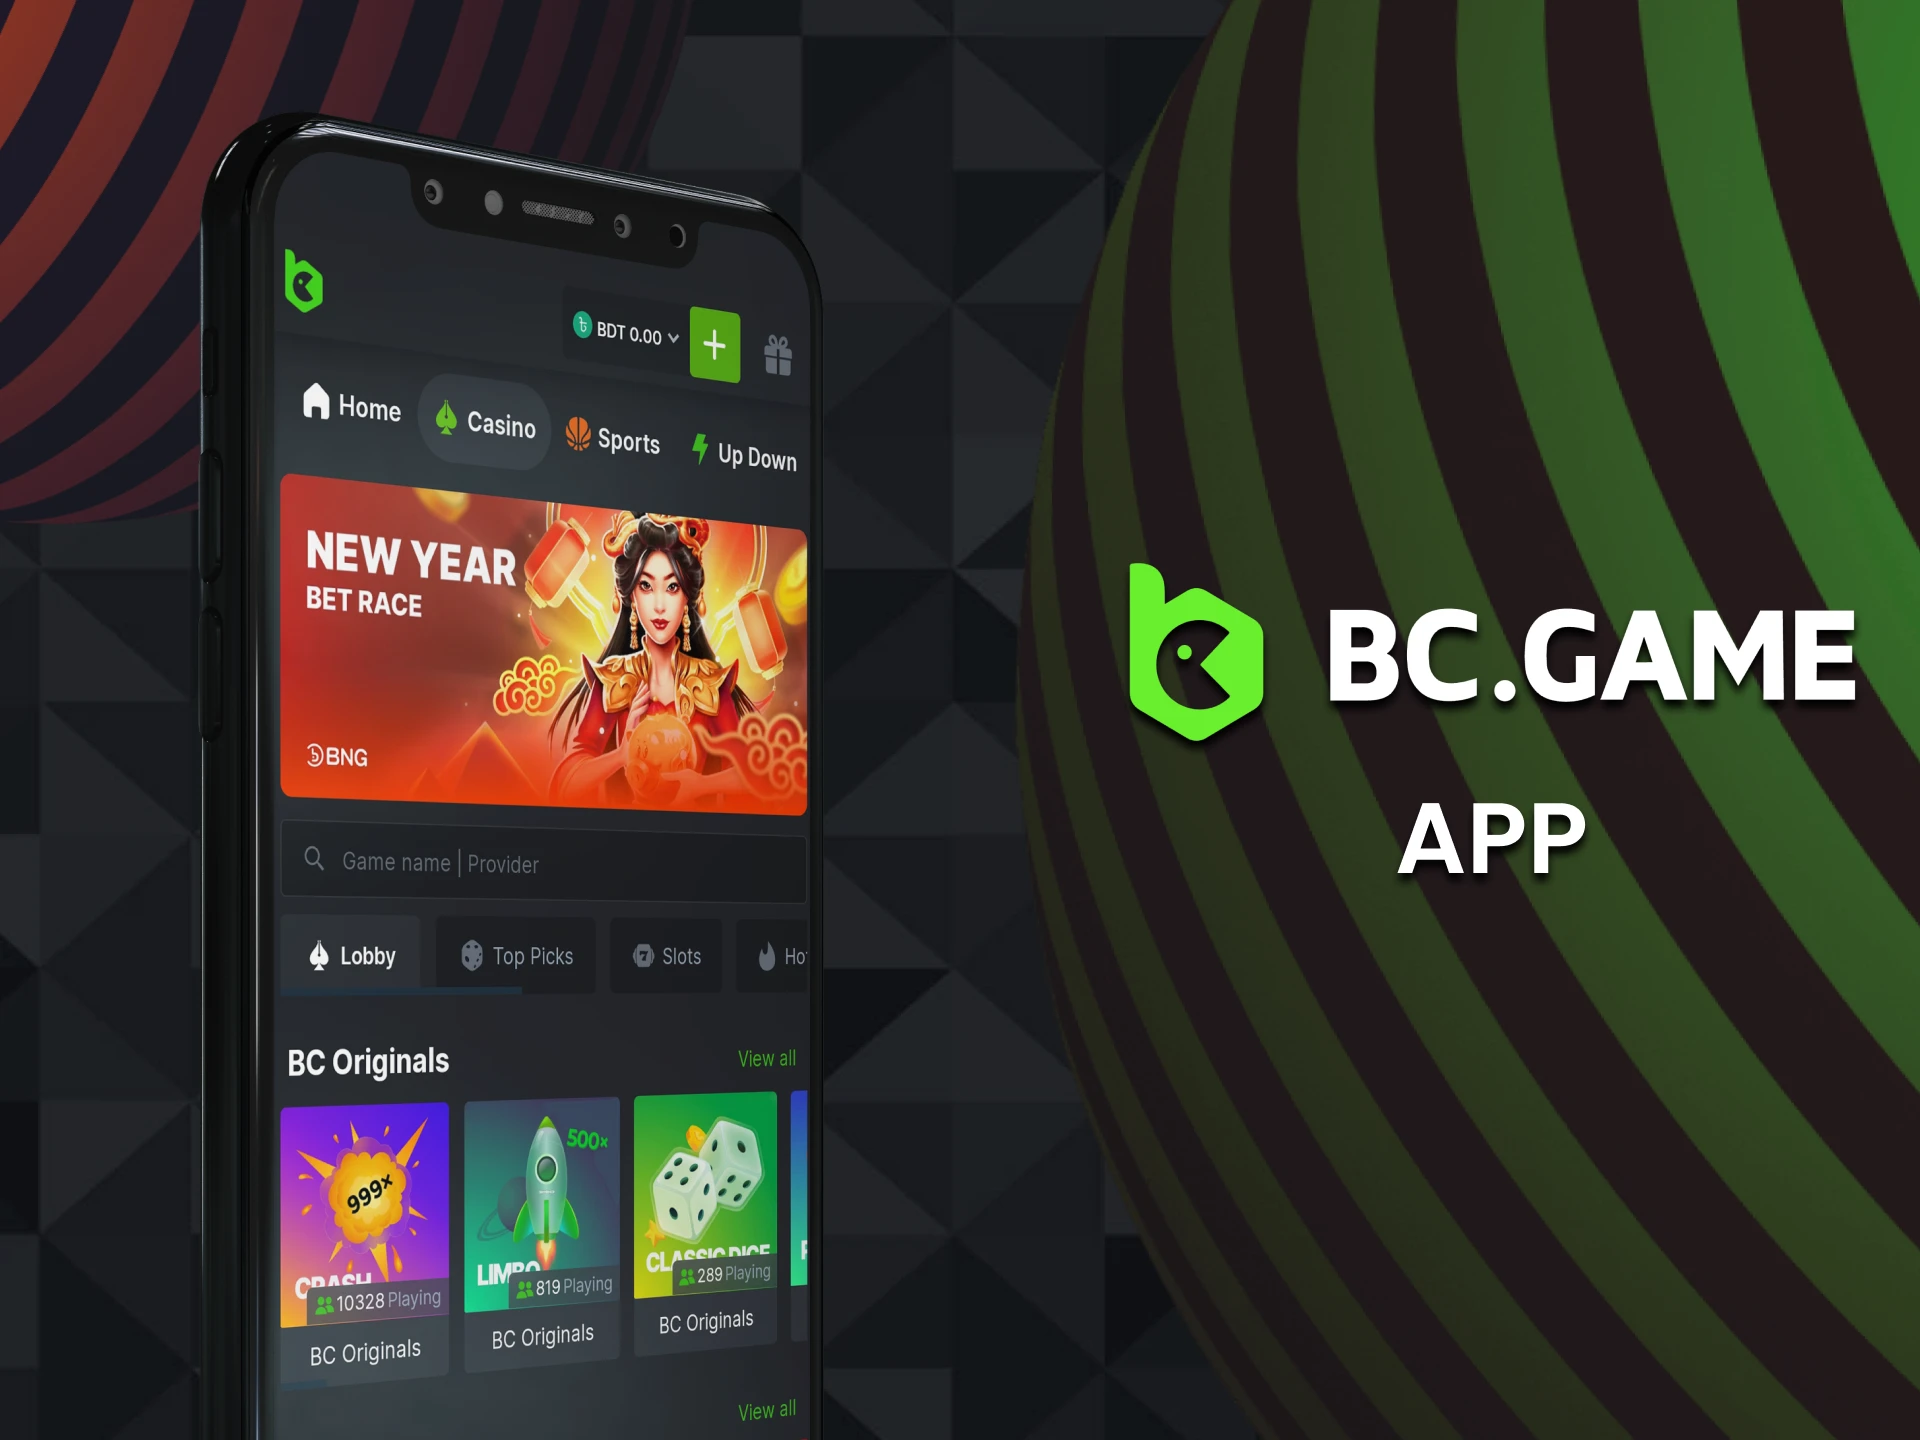 You can play crash games through the BCGame application.